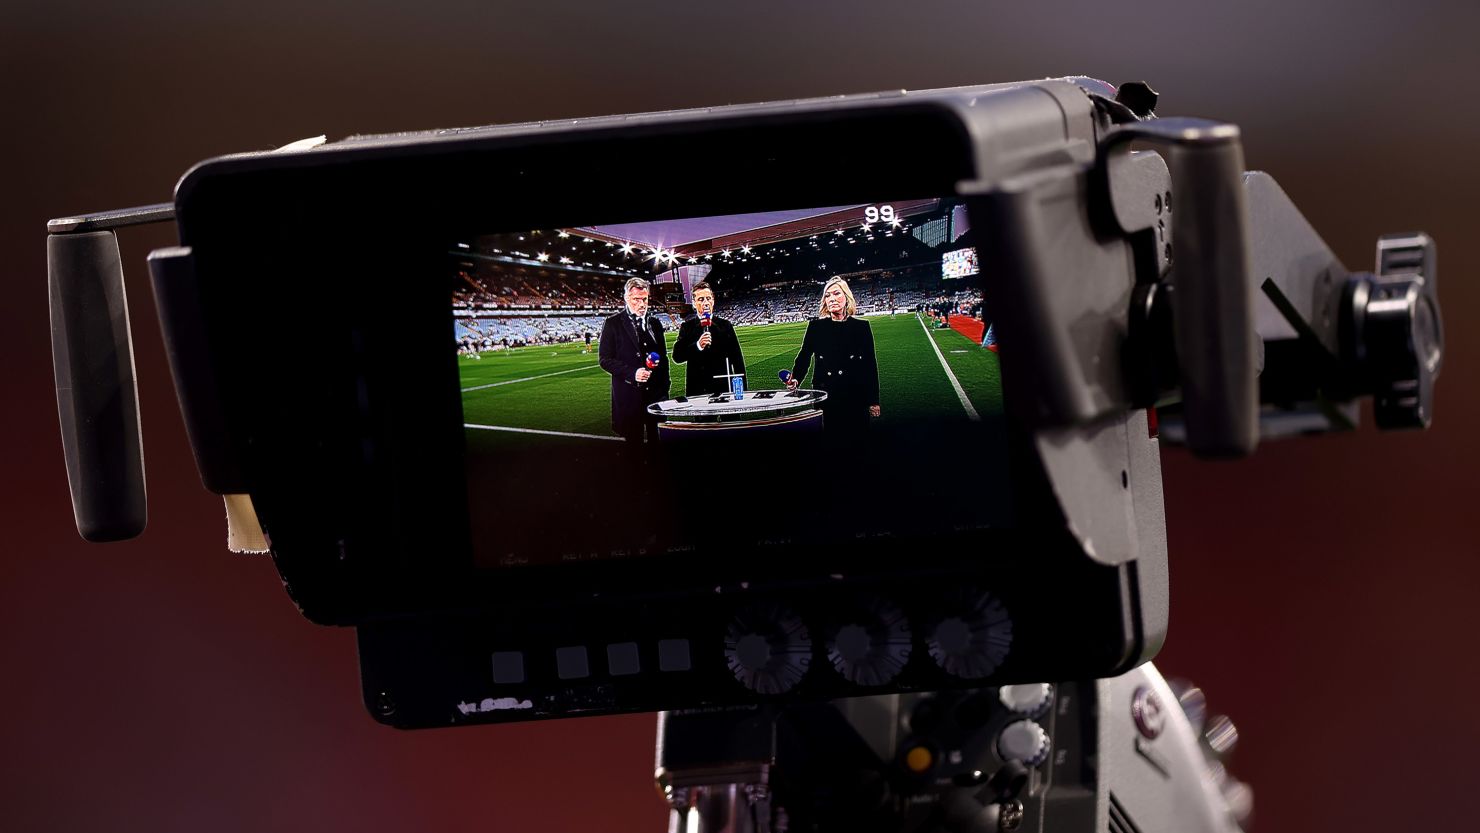 BIRMINGHAM, ENGLAND - SEPTEMBER 16: TV Pundits Jamie Carragher, Gary Neville and Kelly Cates present Friday night football during the Premier League match between Aston Villa and Southampton FC at Villa Park on September 16, 2022 in Birmingham, England. (Photo by Naomi Baker/Getty Images)